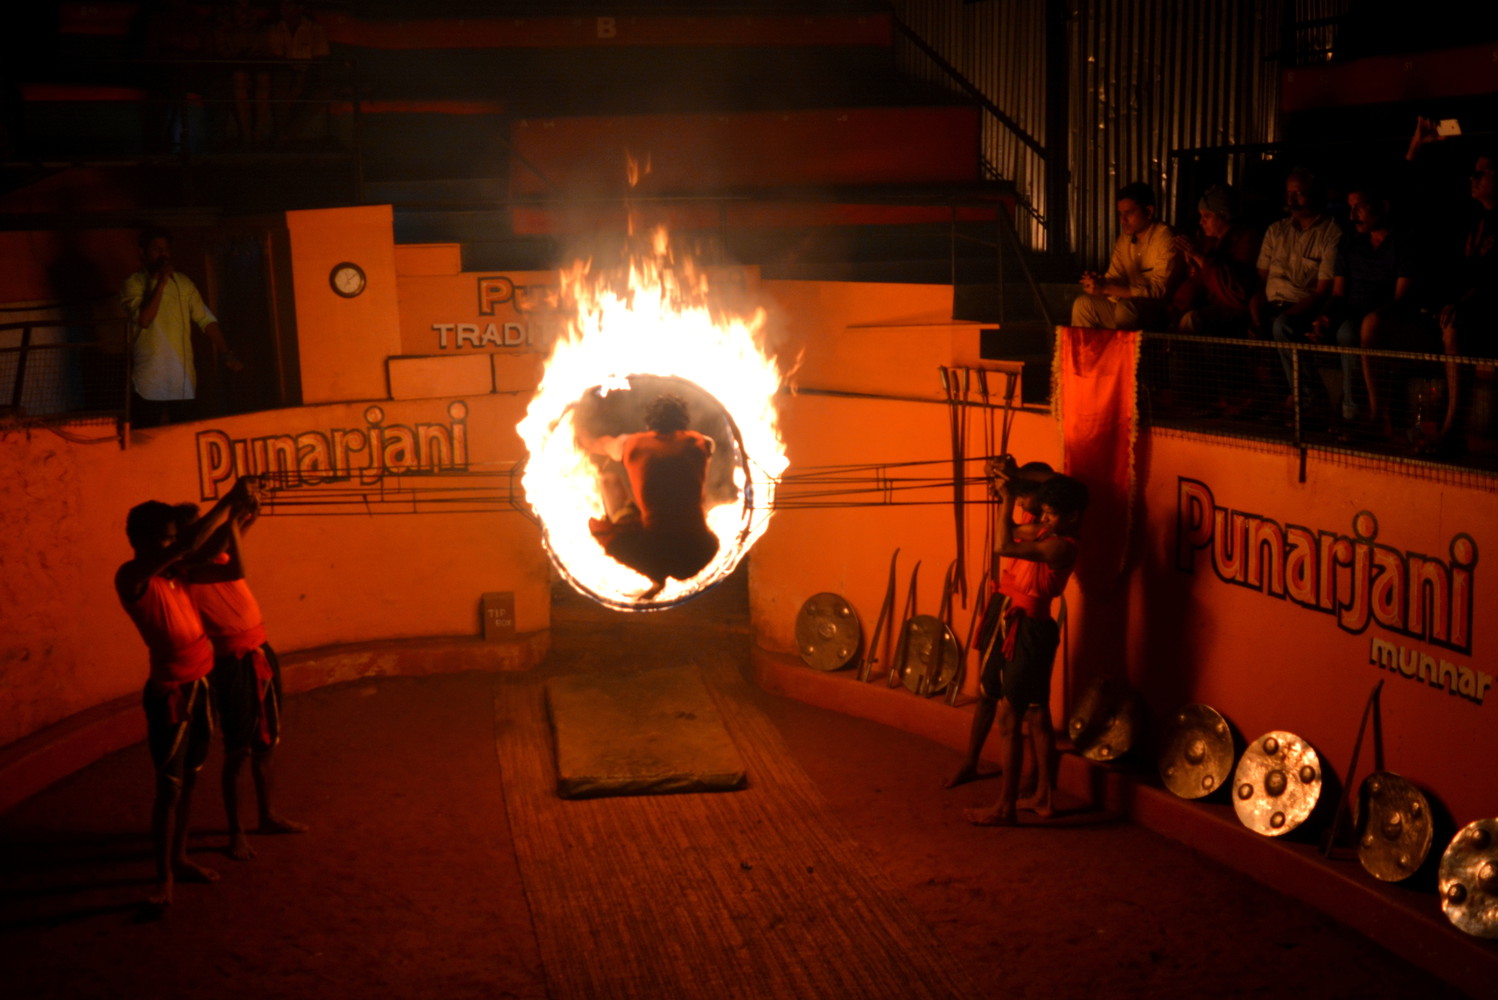 A martial artist jumping through a ring of fire held by other artists